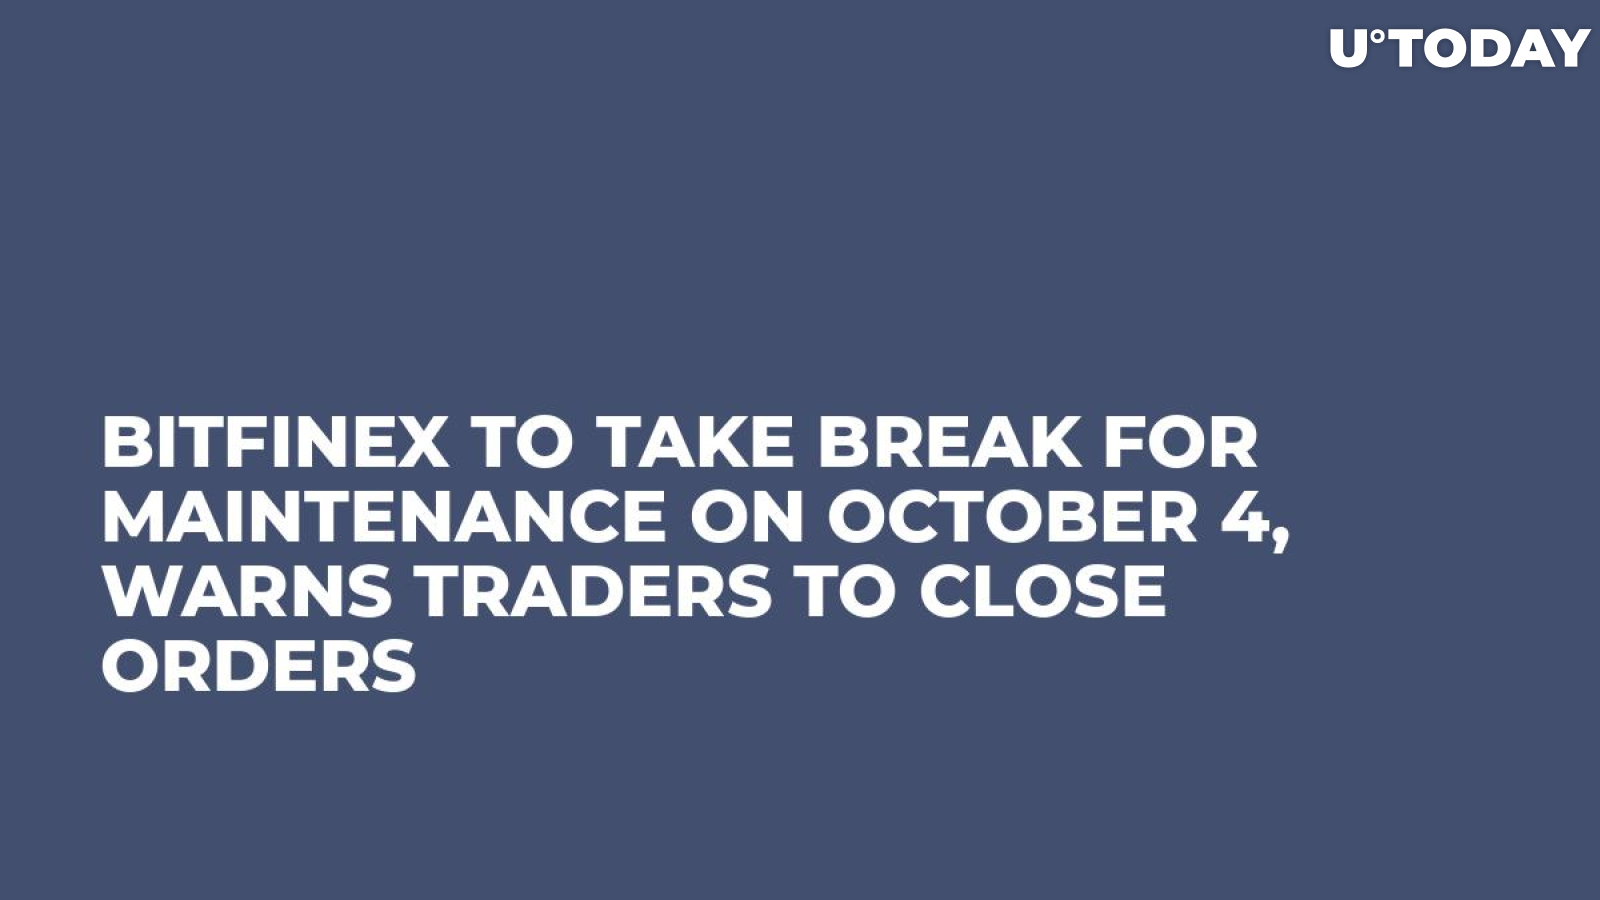 Bitfinex to Take Break for Maintenance on October 4, Warns Traders to Close Orders